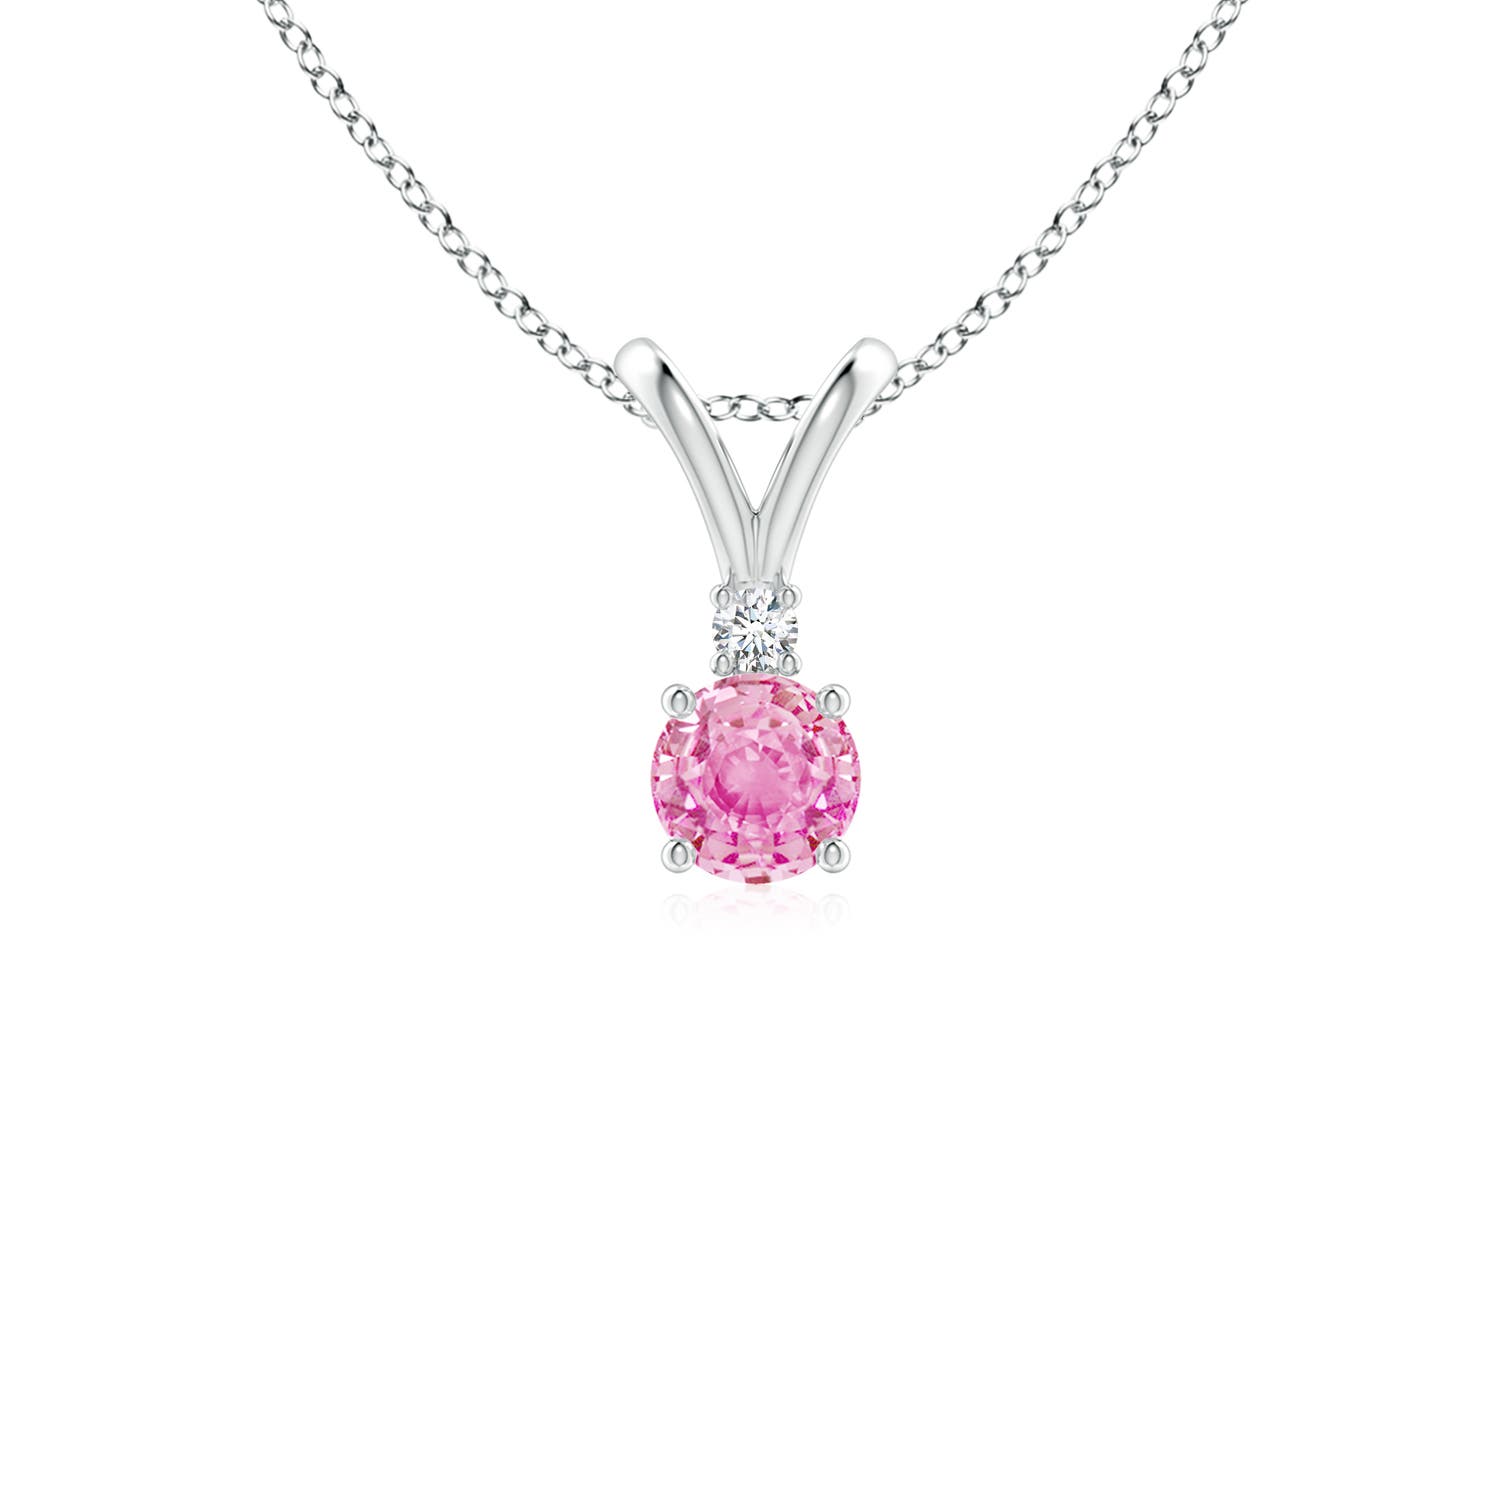 A - Pink Sapphire / 0.34 CT / 14 KT White Gold